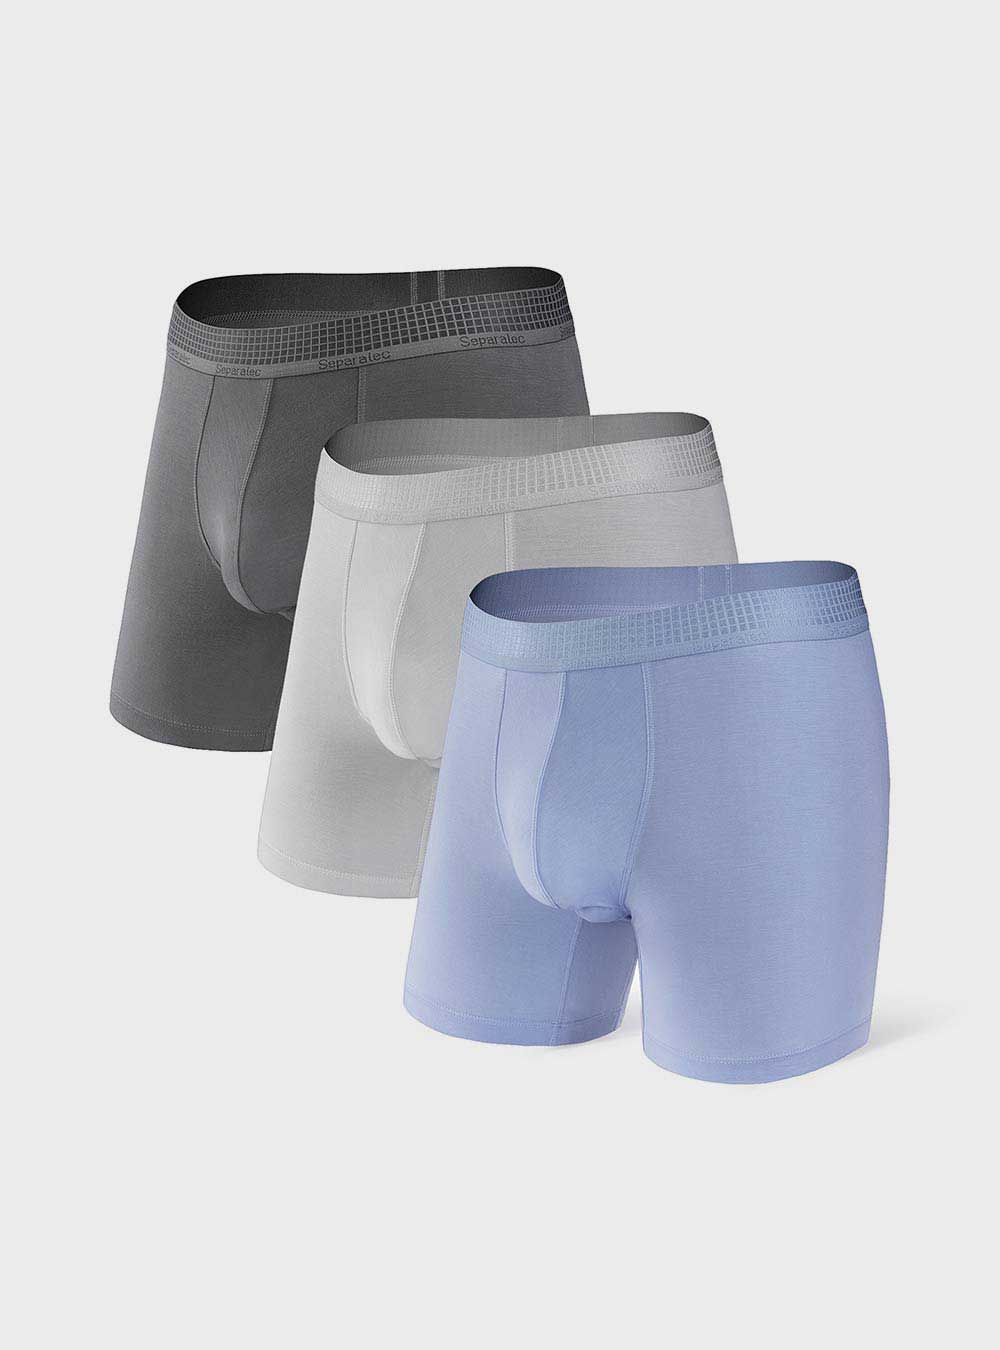 Separatec Underwear, Just like a perfect layup, Separatec's Dual Pouch  technology delivers exceptional support, allowing you to maneuver  effortlessly on the